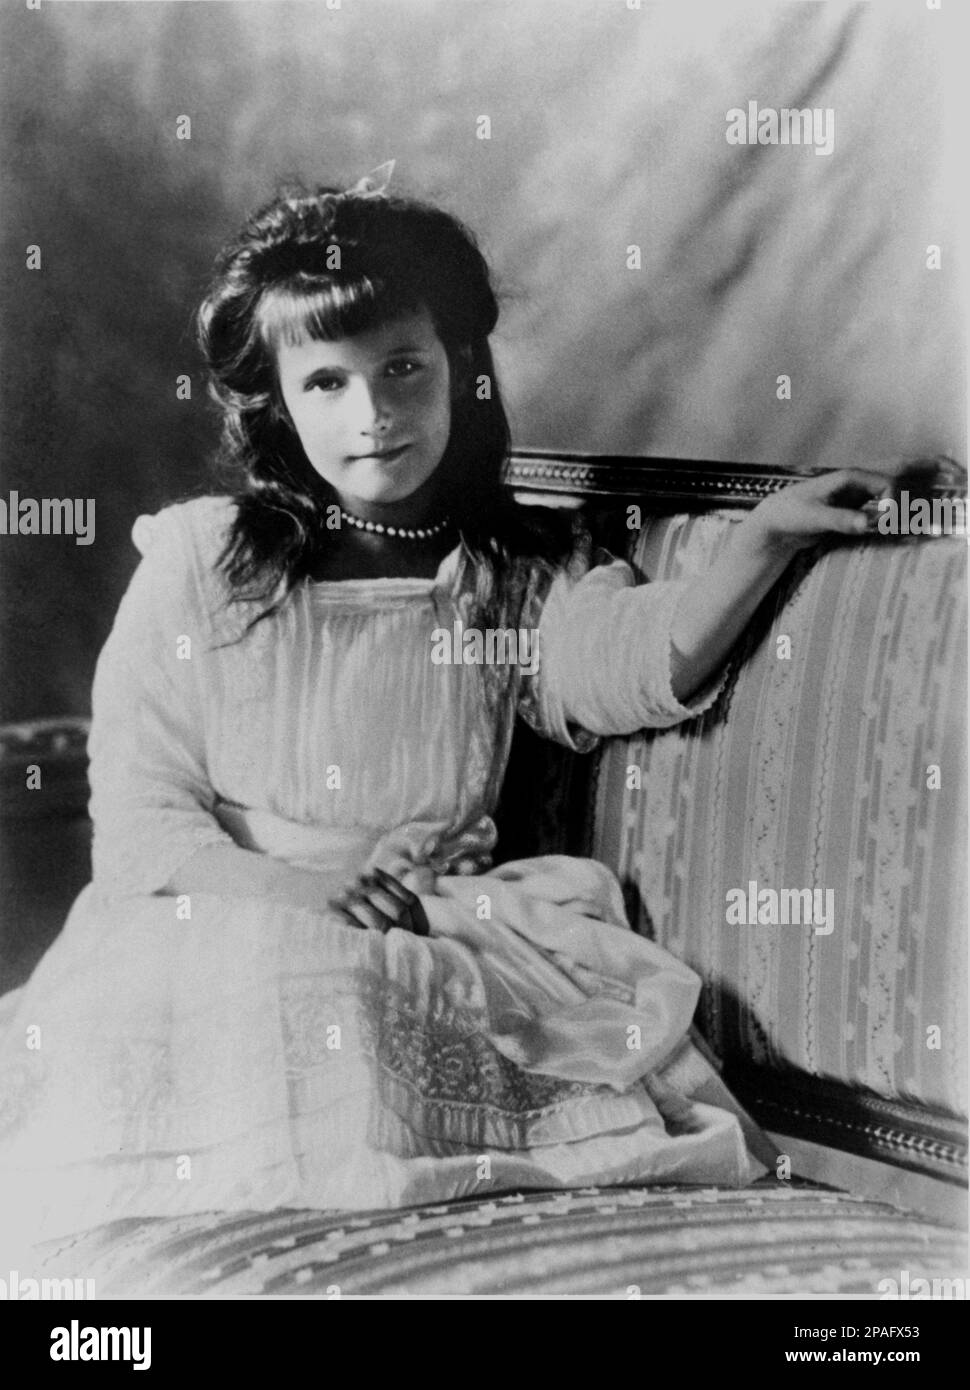 1911 ca : The russian Her Imperial Highness Grand Duchess  ANASTASIA  ROMANOV ( 1901 - 1918 ) ,the youngest  daughter  of Tsar Nicholas II of Russia and Alexandra Fyodorovna . She is presumed to have been murdered with her family on July 17, 1918, by forces of the Bolshevik secret police. However, rumors have persisted of her possible escape since 1918, fueled by reports that two sets of remains, identified as Alexei Nikolaevich, Tsarevich of Russia, and either Anastasia or her elder sister Maria, were missing from a mass grave found near Ekaterinburg and later identified through DNA testing a Stock Photo